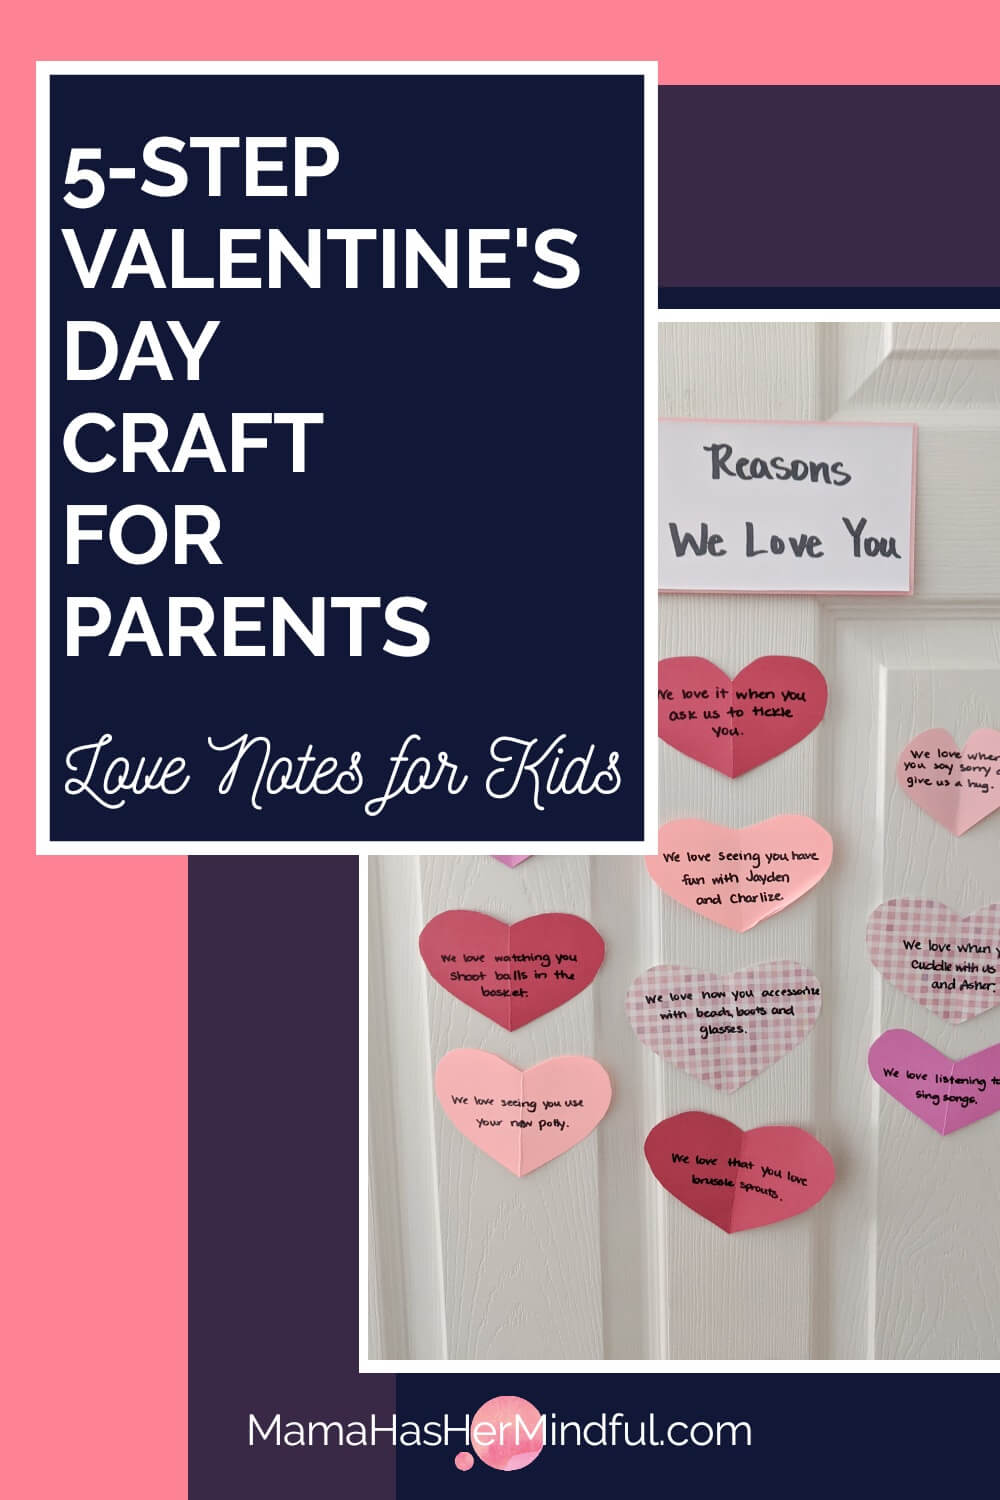 10 Days of Love Notes for Kids: 5-Step Valentine’s Day Craft for Parents